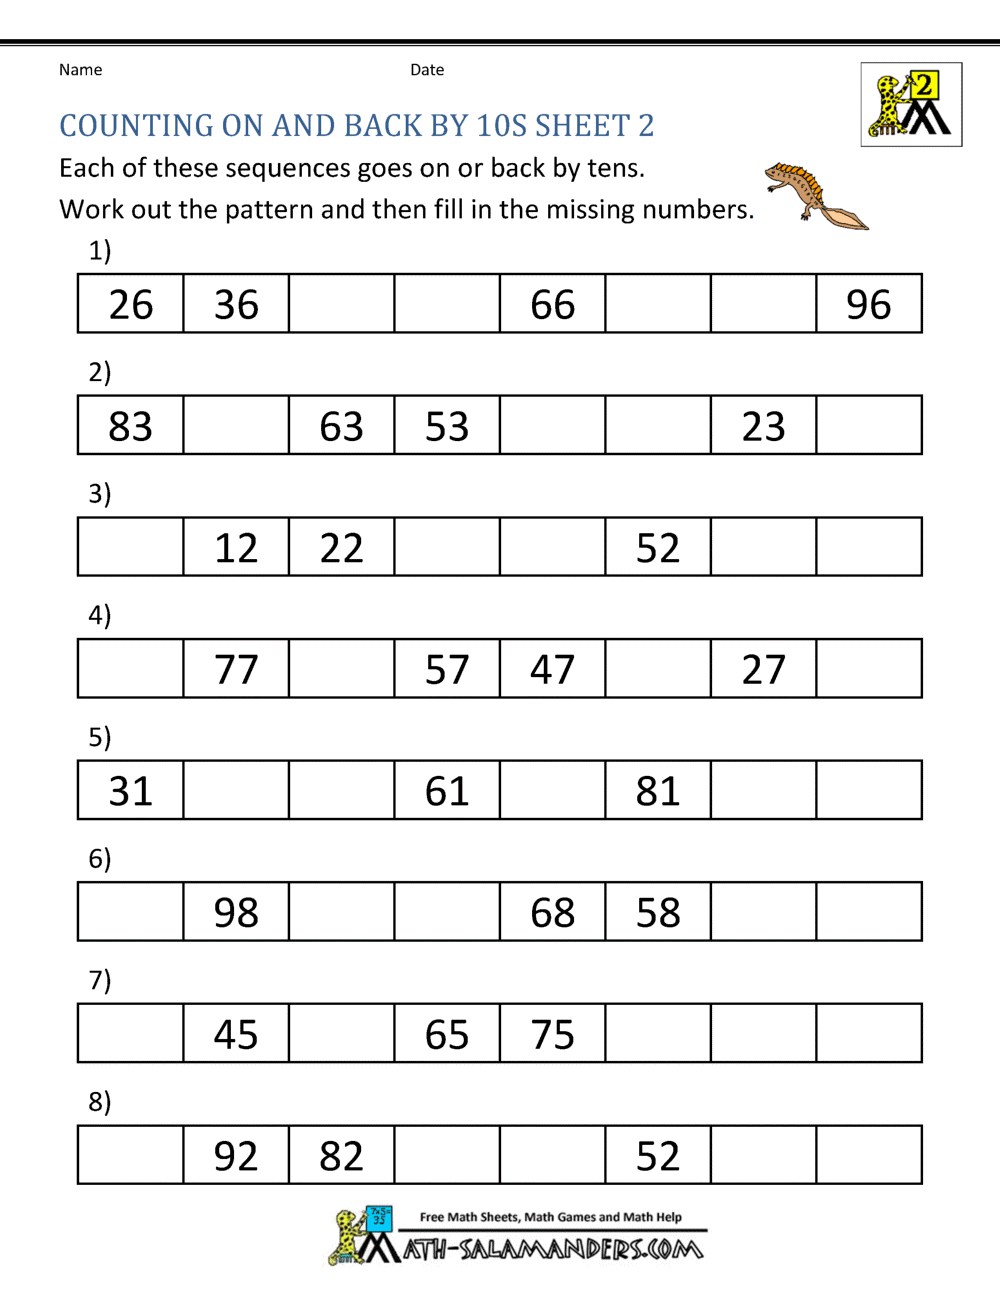 count-by-tens-worksheets